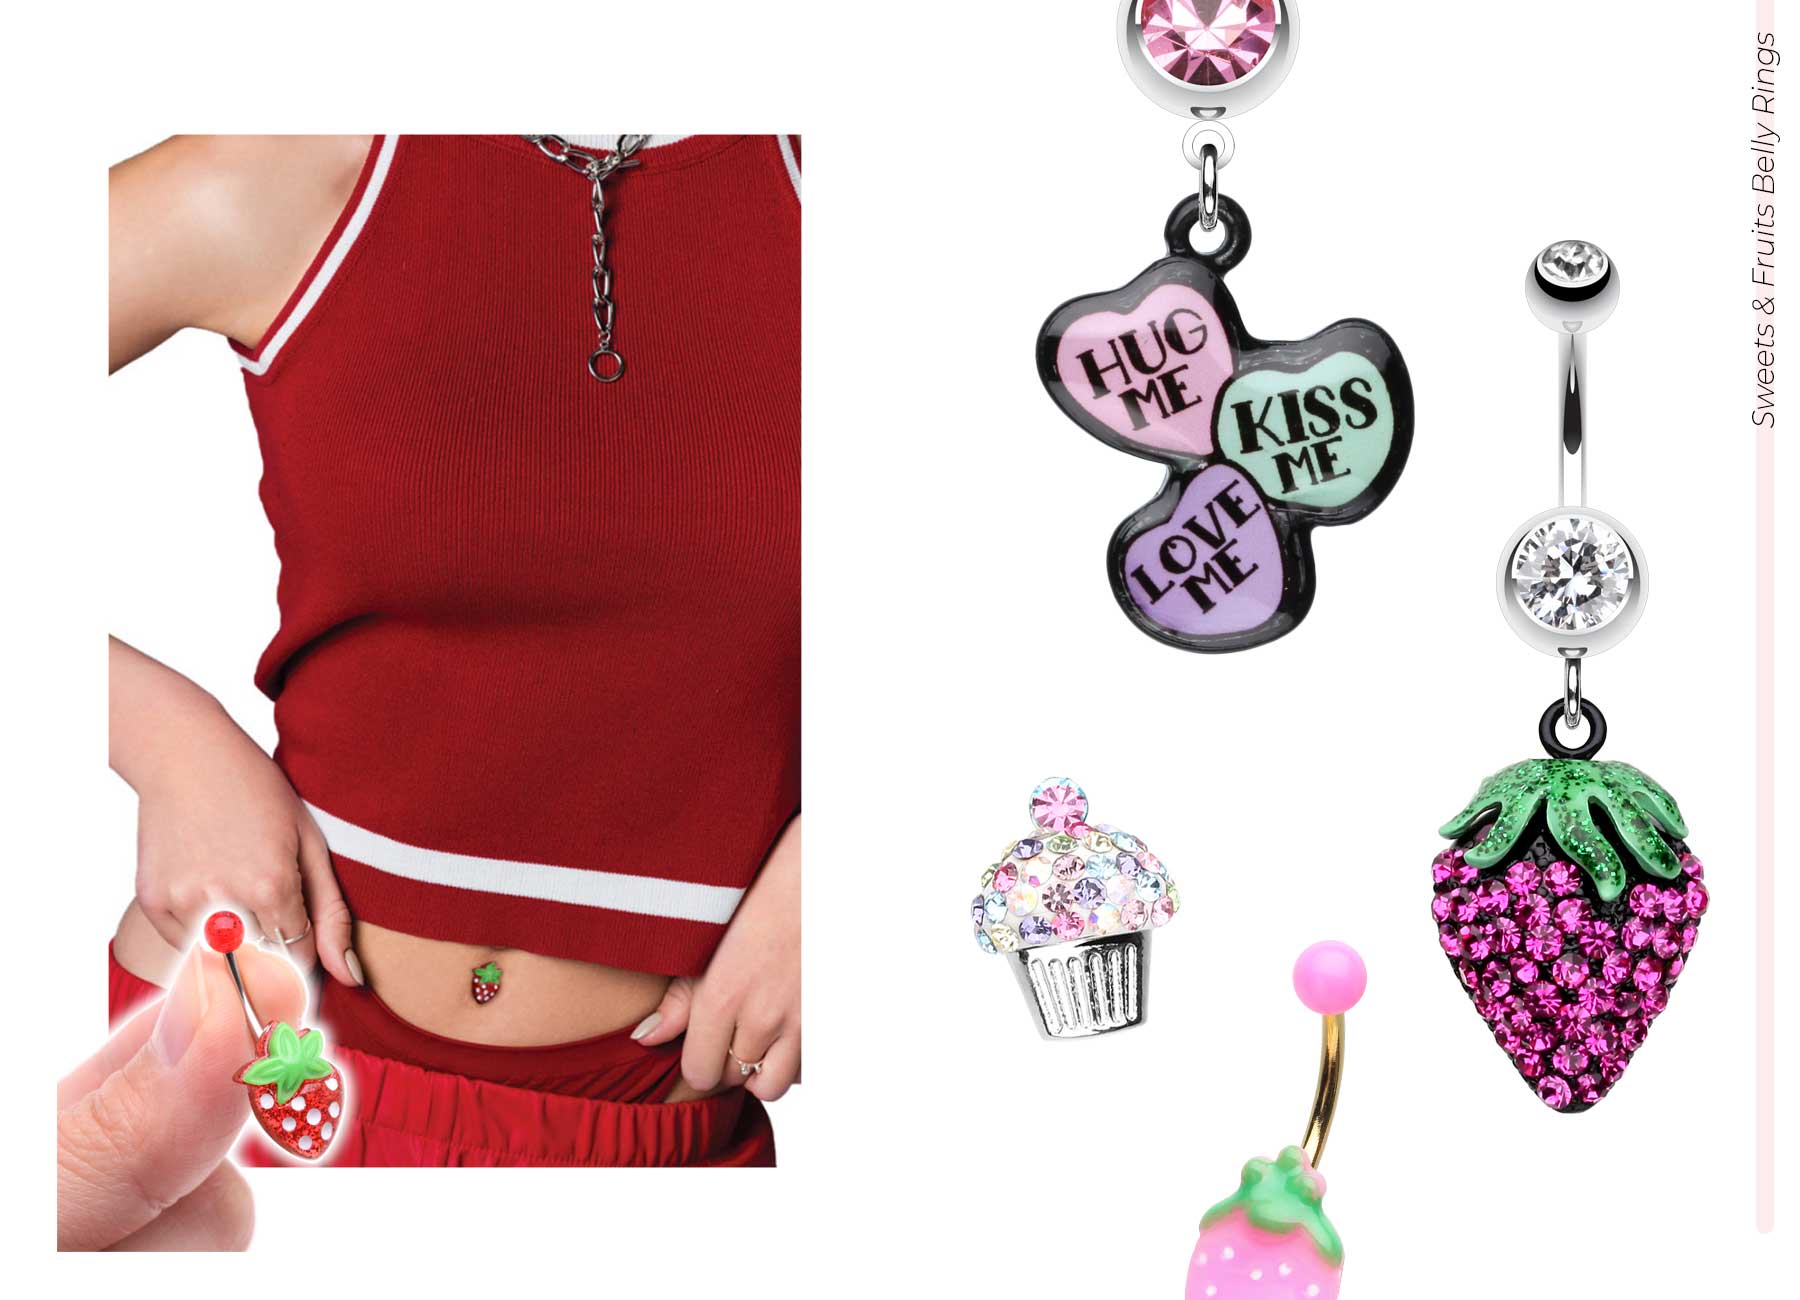 Classic and cute themed navel piercing barbells from bm25.com